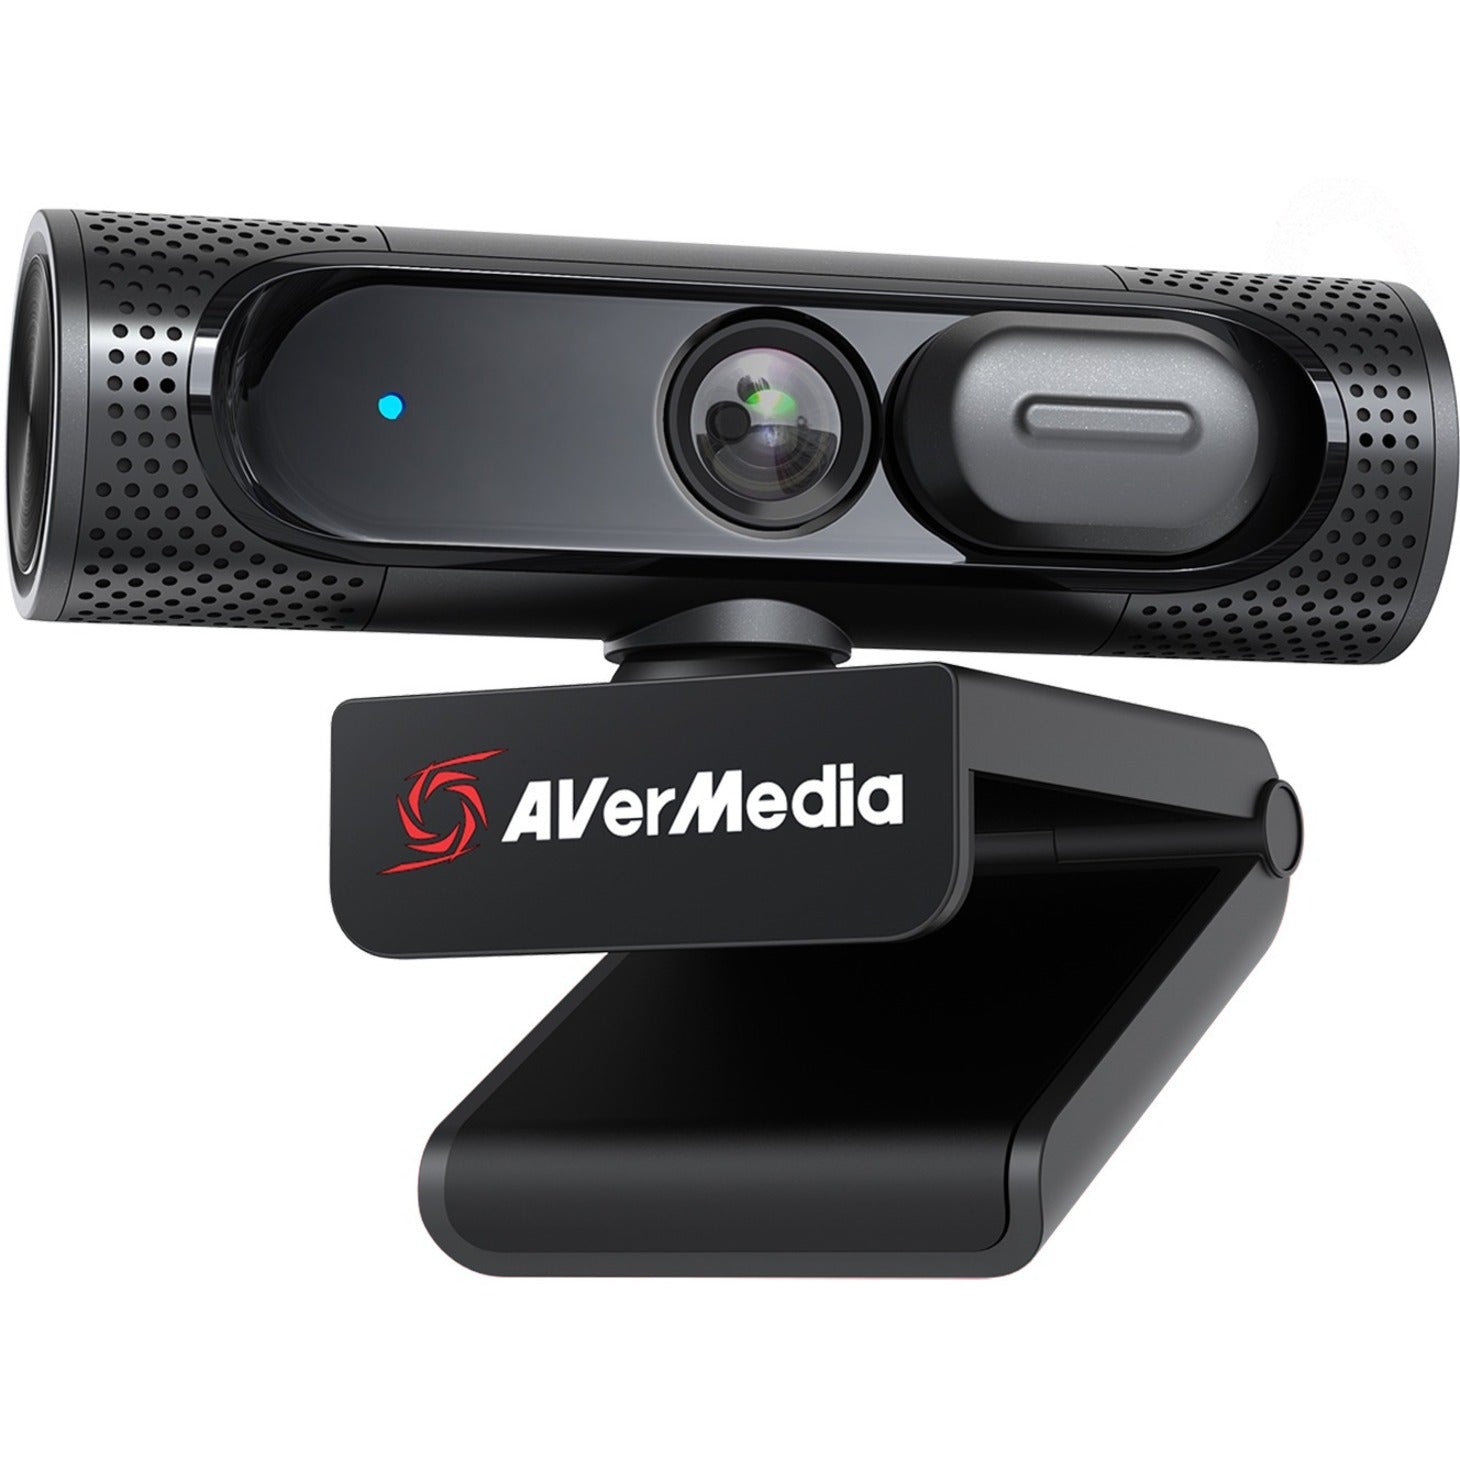 AVerMedia PW315 CAM 315 Webcam, Full 1080p60 with Wide-Angle View and Stereo Audio